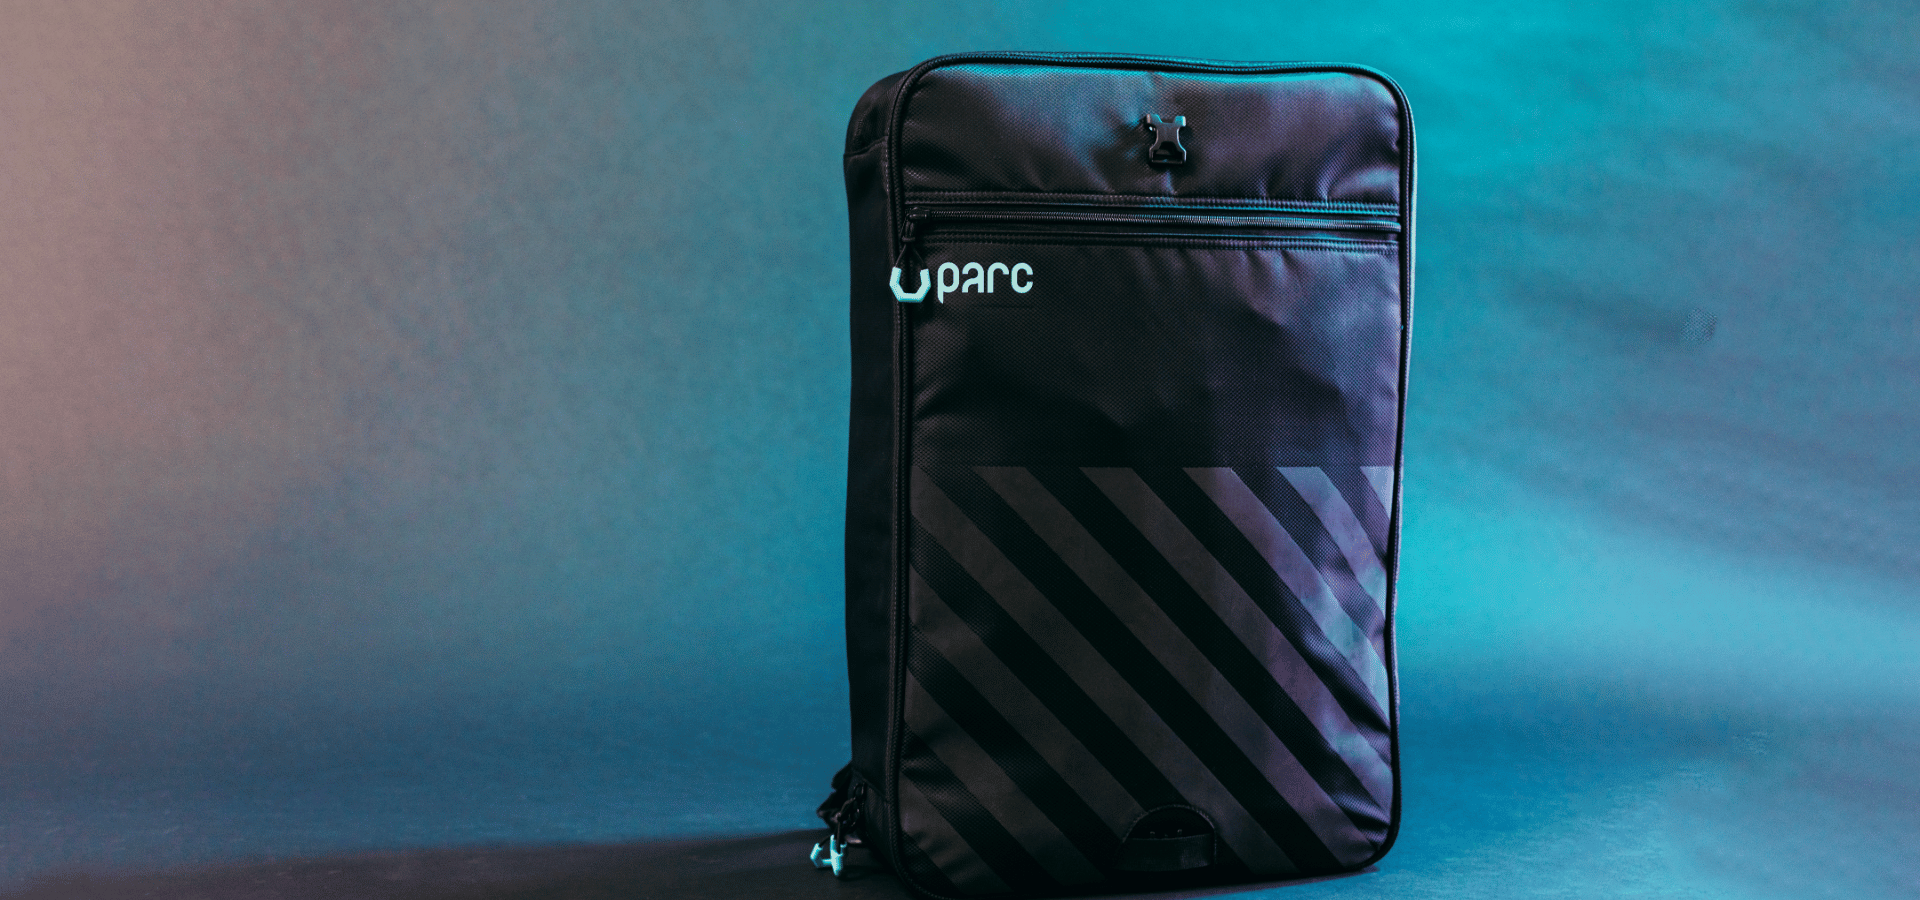 Black Parc cycling gear bag with turquoise logo and zipper pulls against moody blue background. Reflective diagonal stripes on bottom half of exterior front of the cycling kit bag.